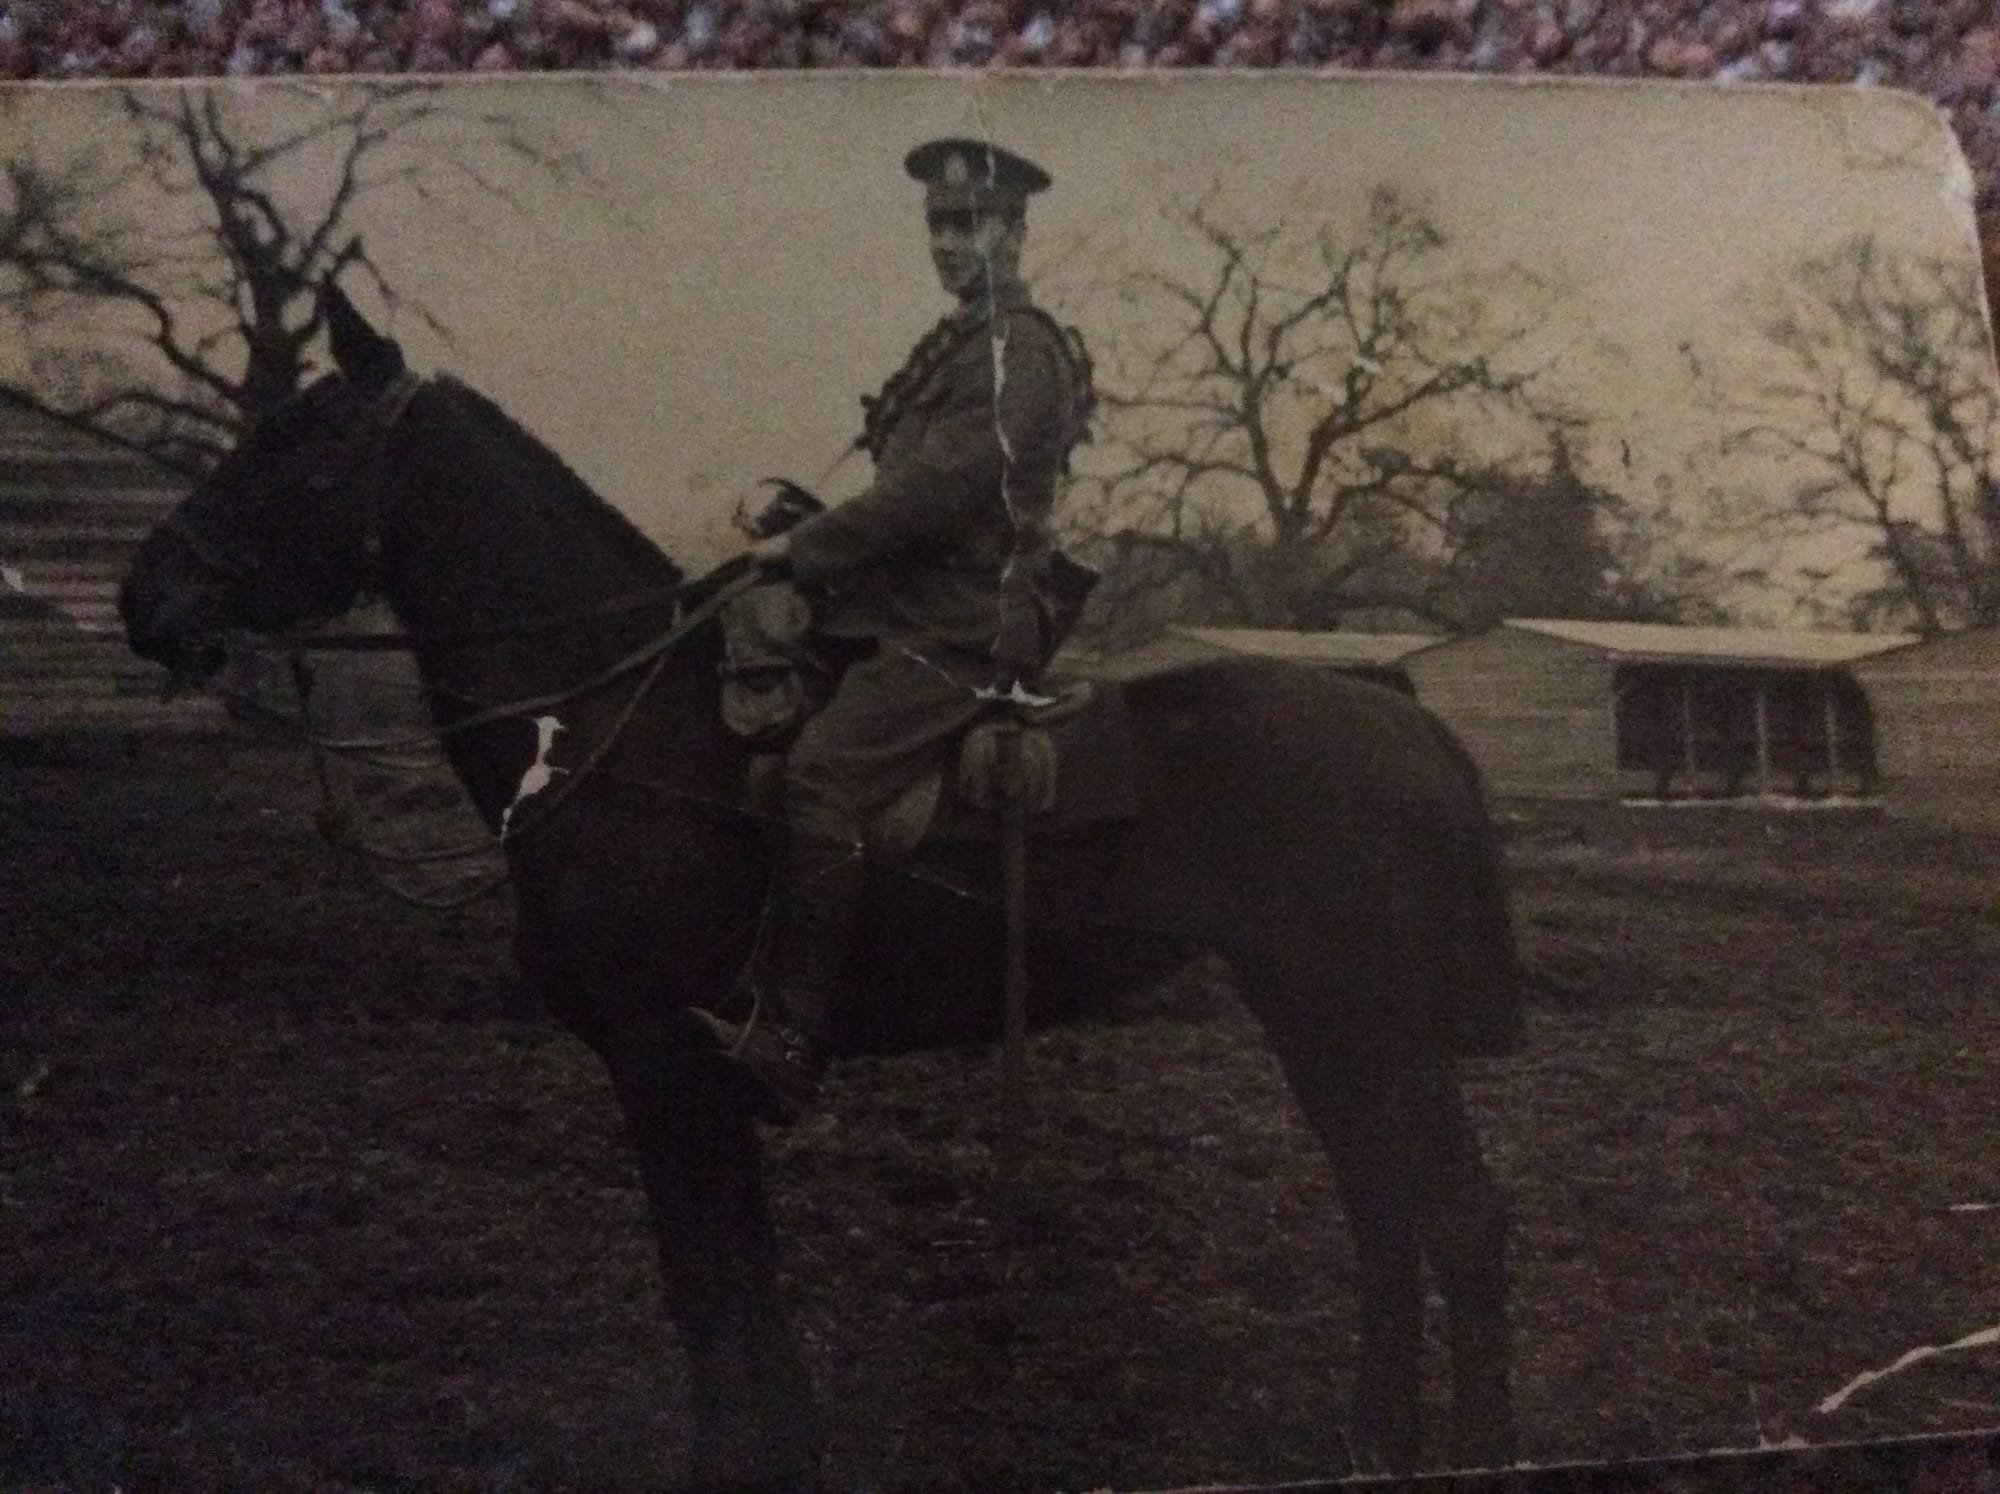 Private. 1187. 2KEH. Mounted on his horse 'Dolby'. Courtesy of Helen Peach and Doug Corder (descendants)